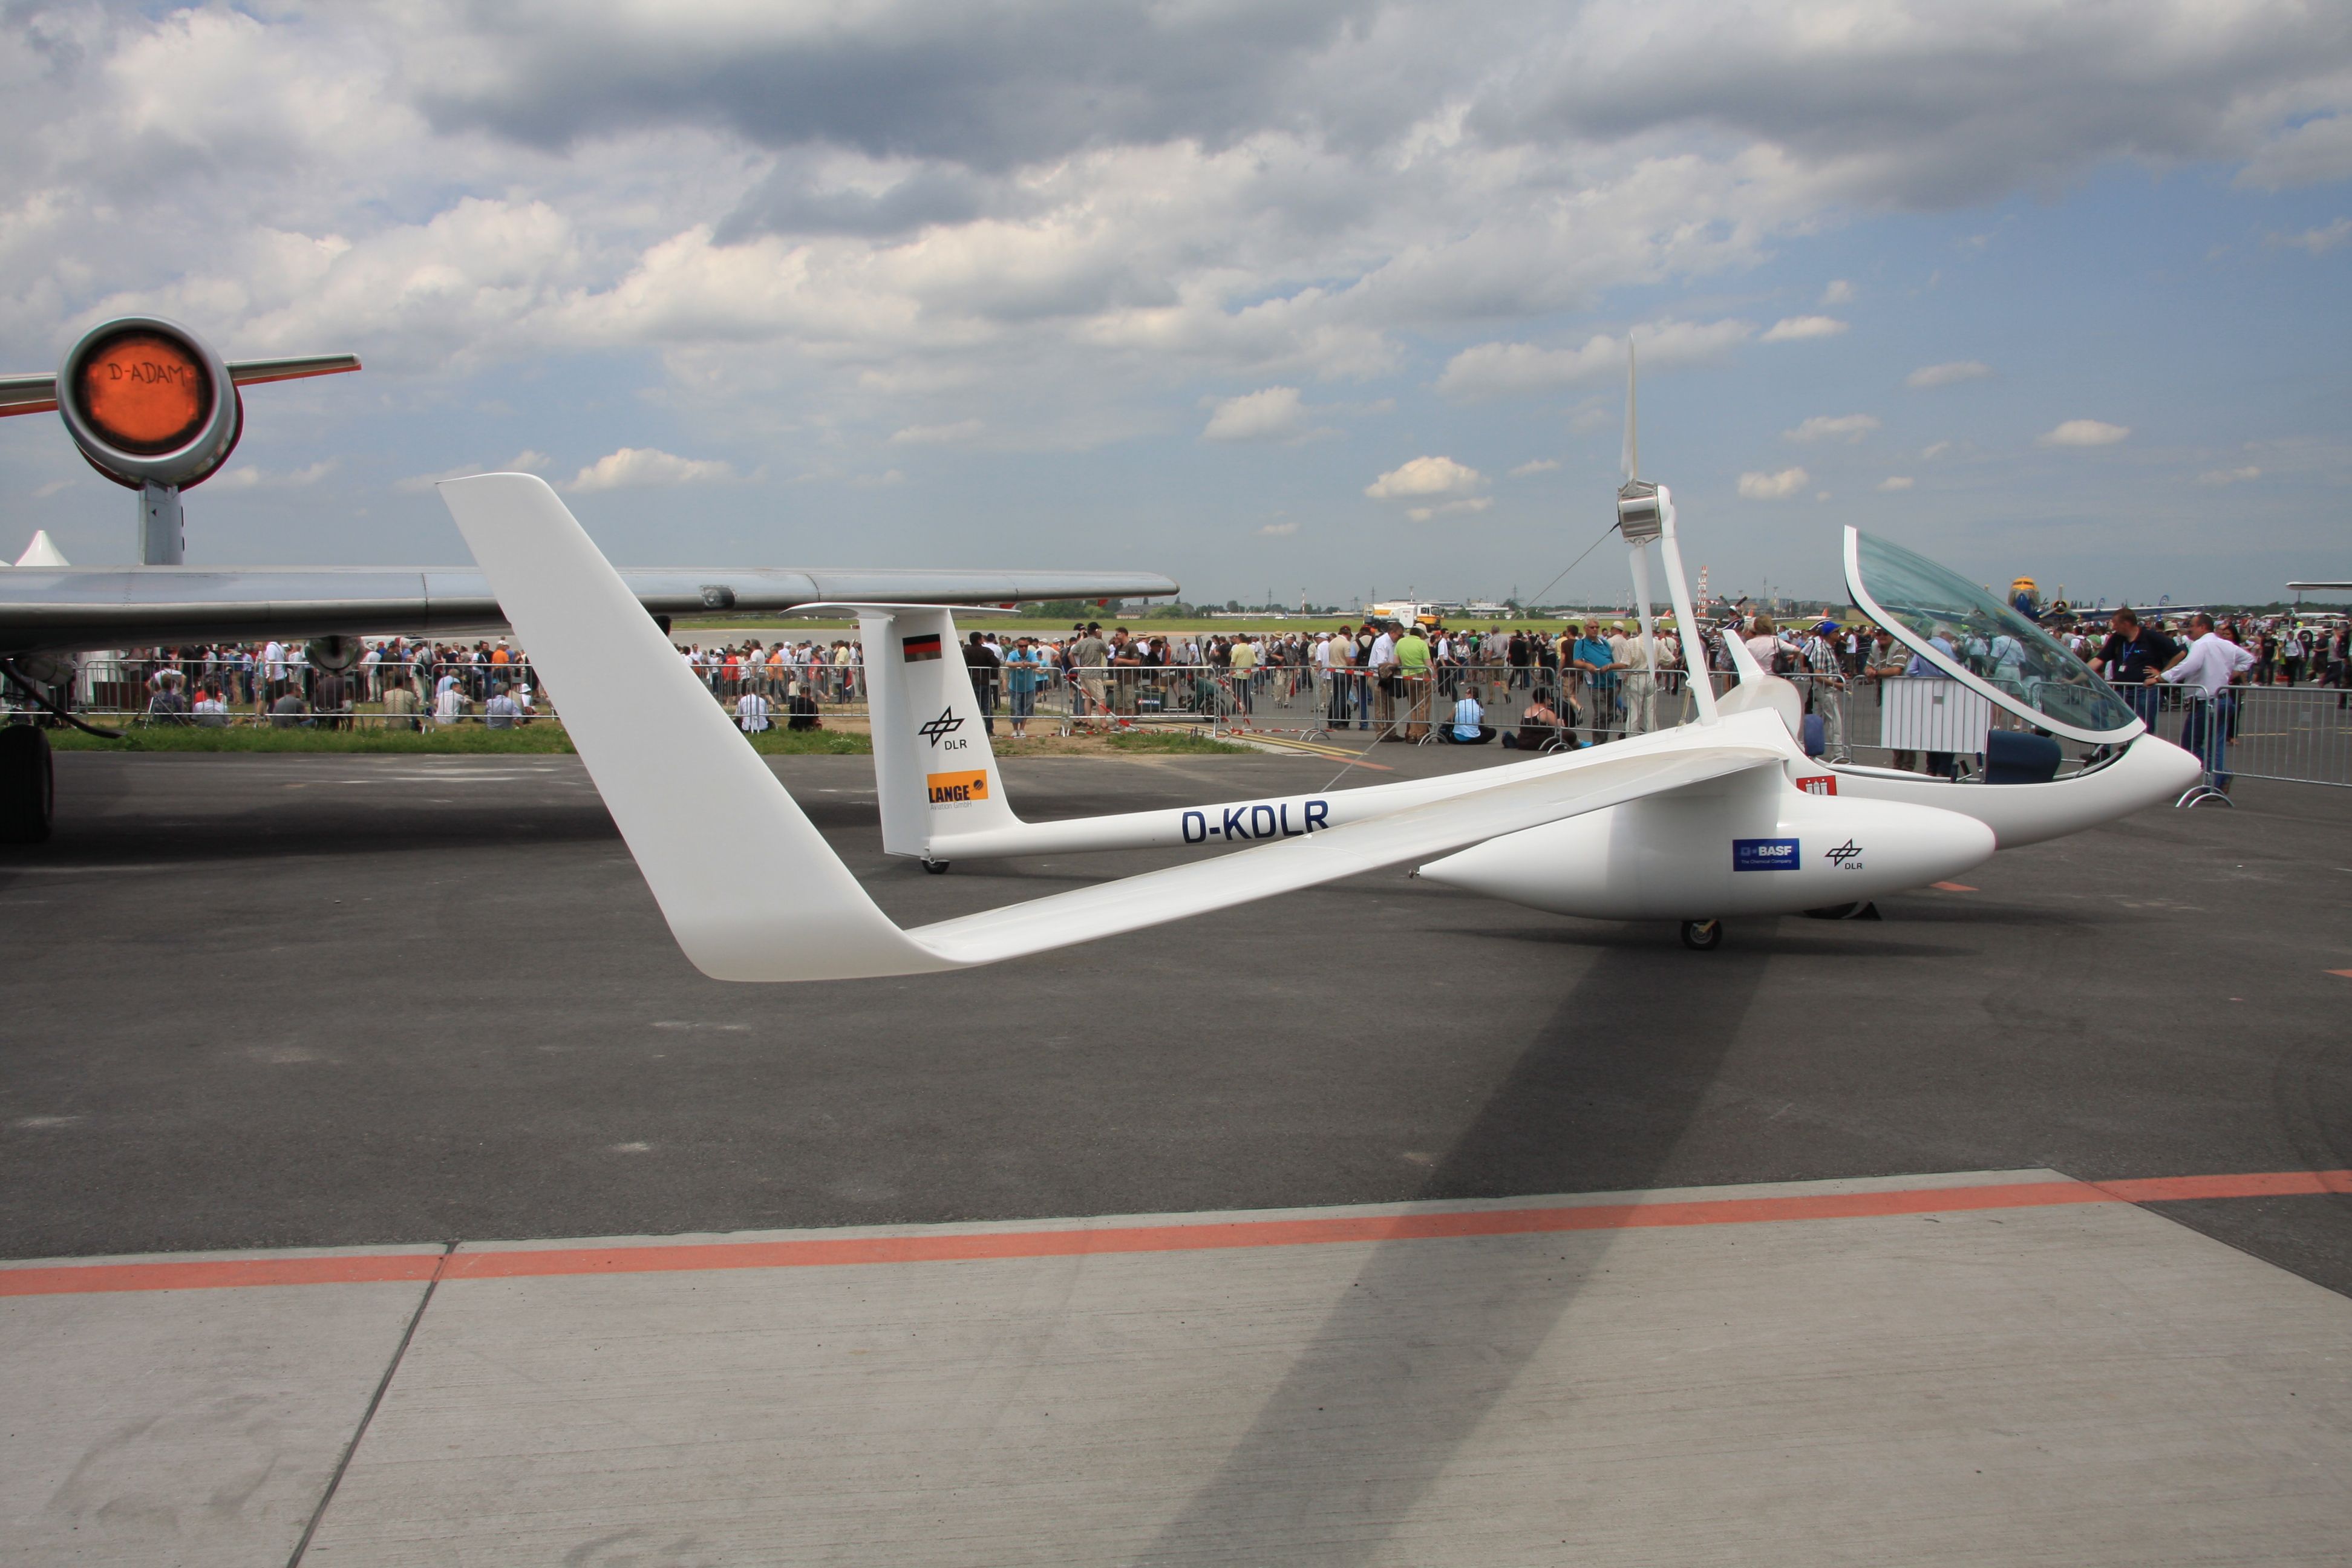 Antares DLR-H2 aircraft at International Space Exhibition